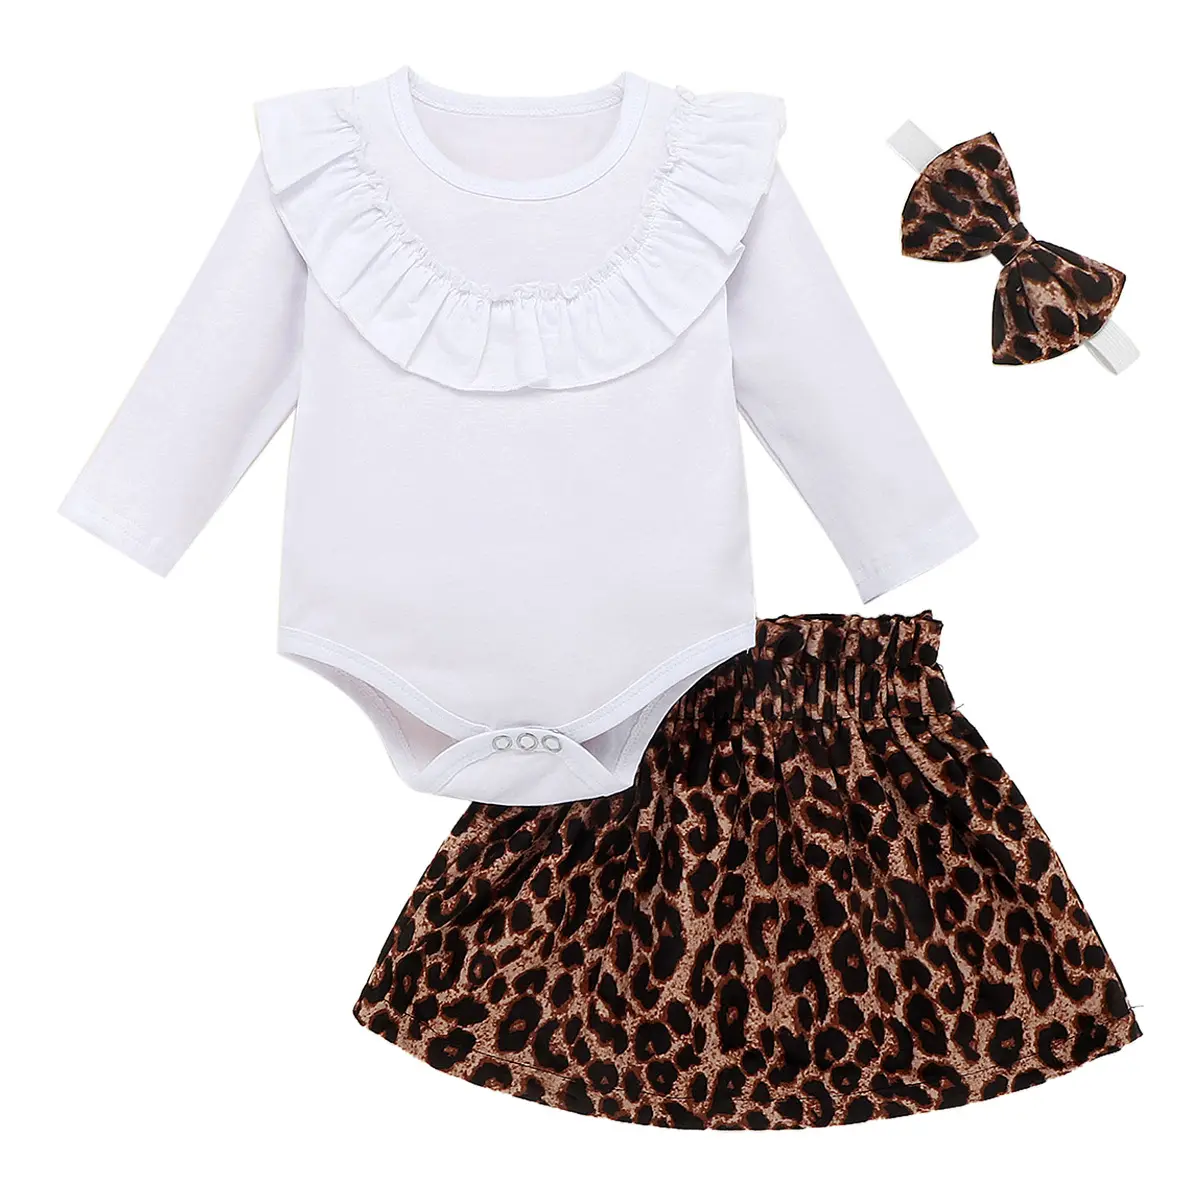 Toddler Baby Girl Clothes Infant Baby Girls Solid Romper With Leopard Skirt Headband 3 Pcs Sets